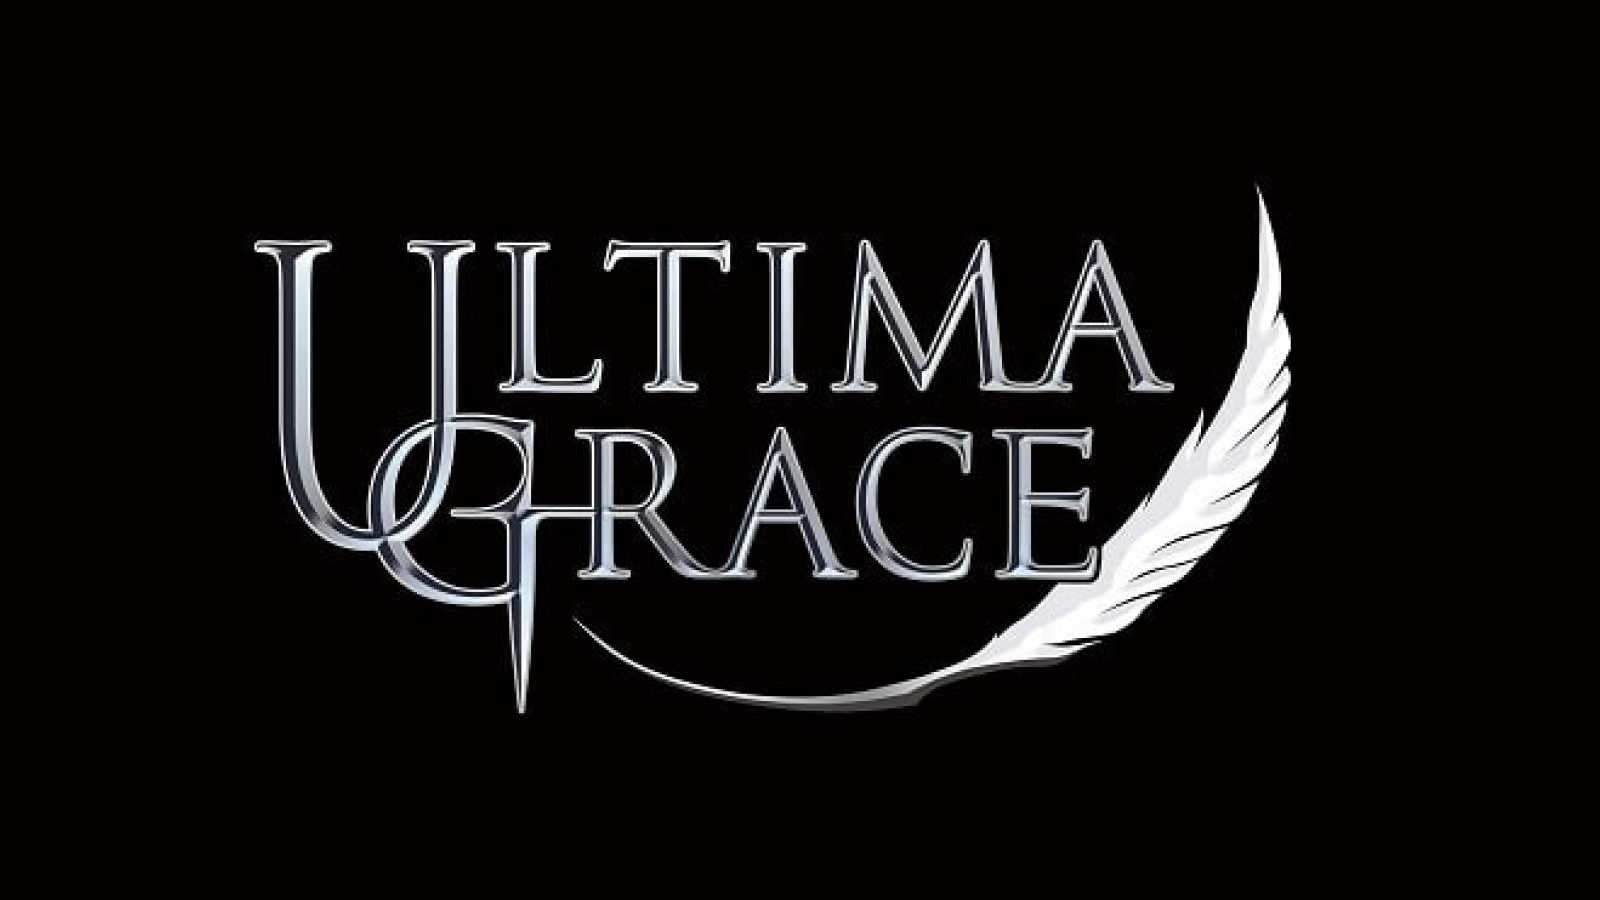 ULTIMA GRACE © ULTIMA GRACE. All rights reserved.